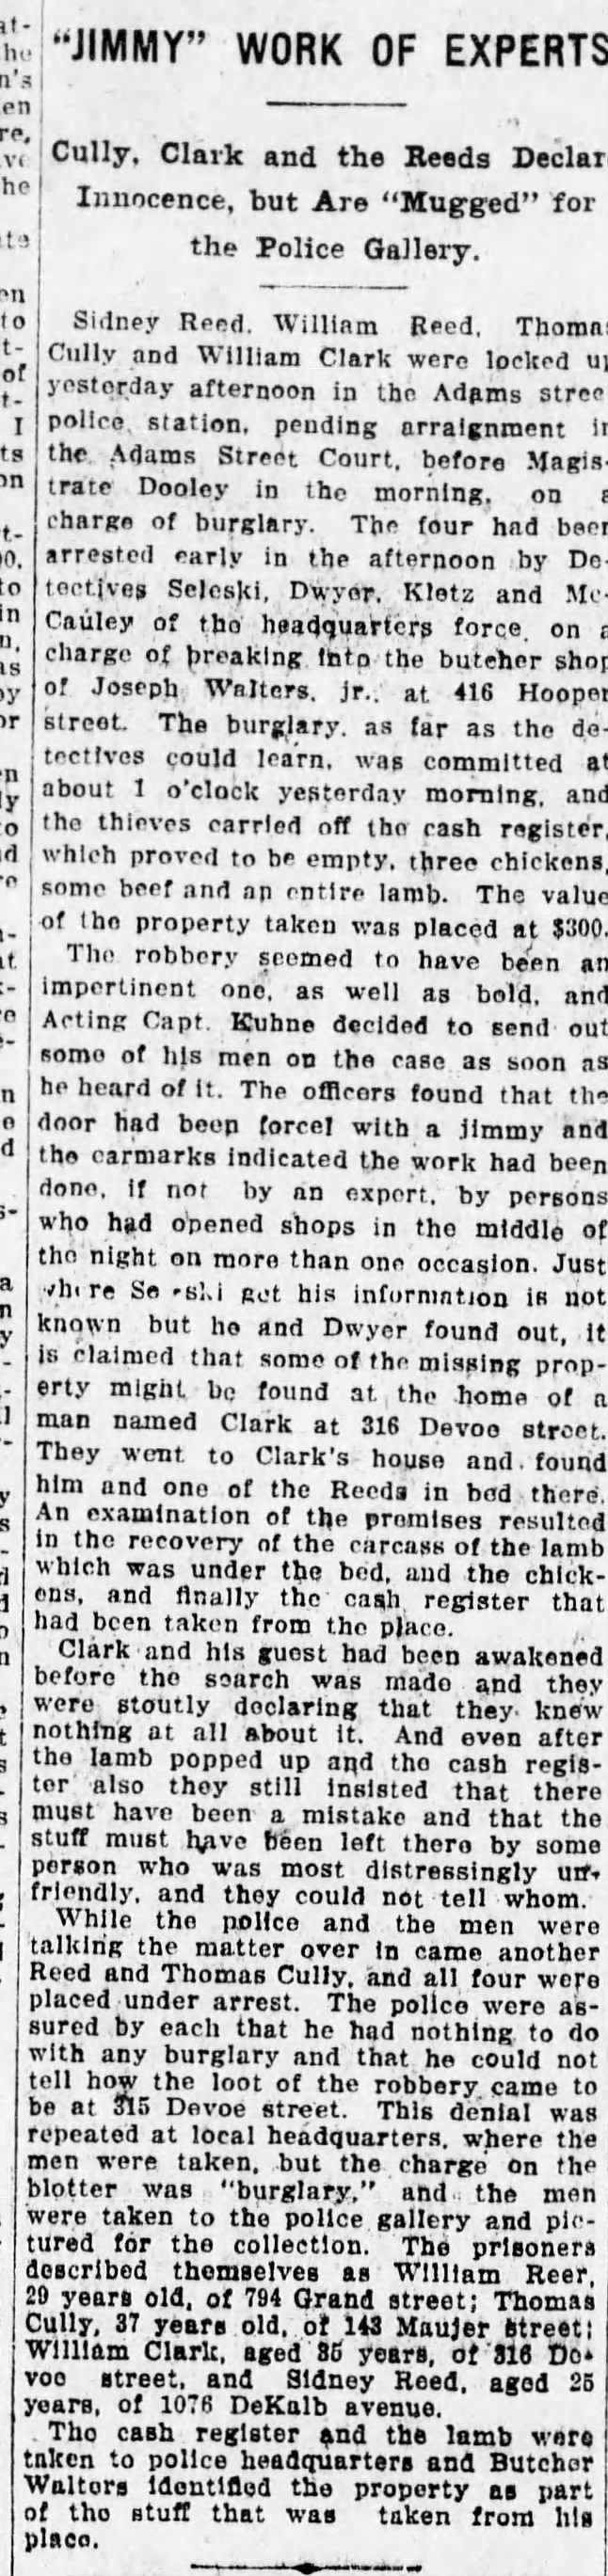 Tom Cully Sr arrested with others for Burglary. 12 Jan 1908.